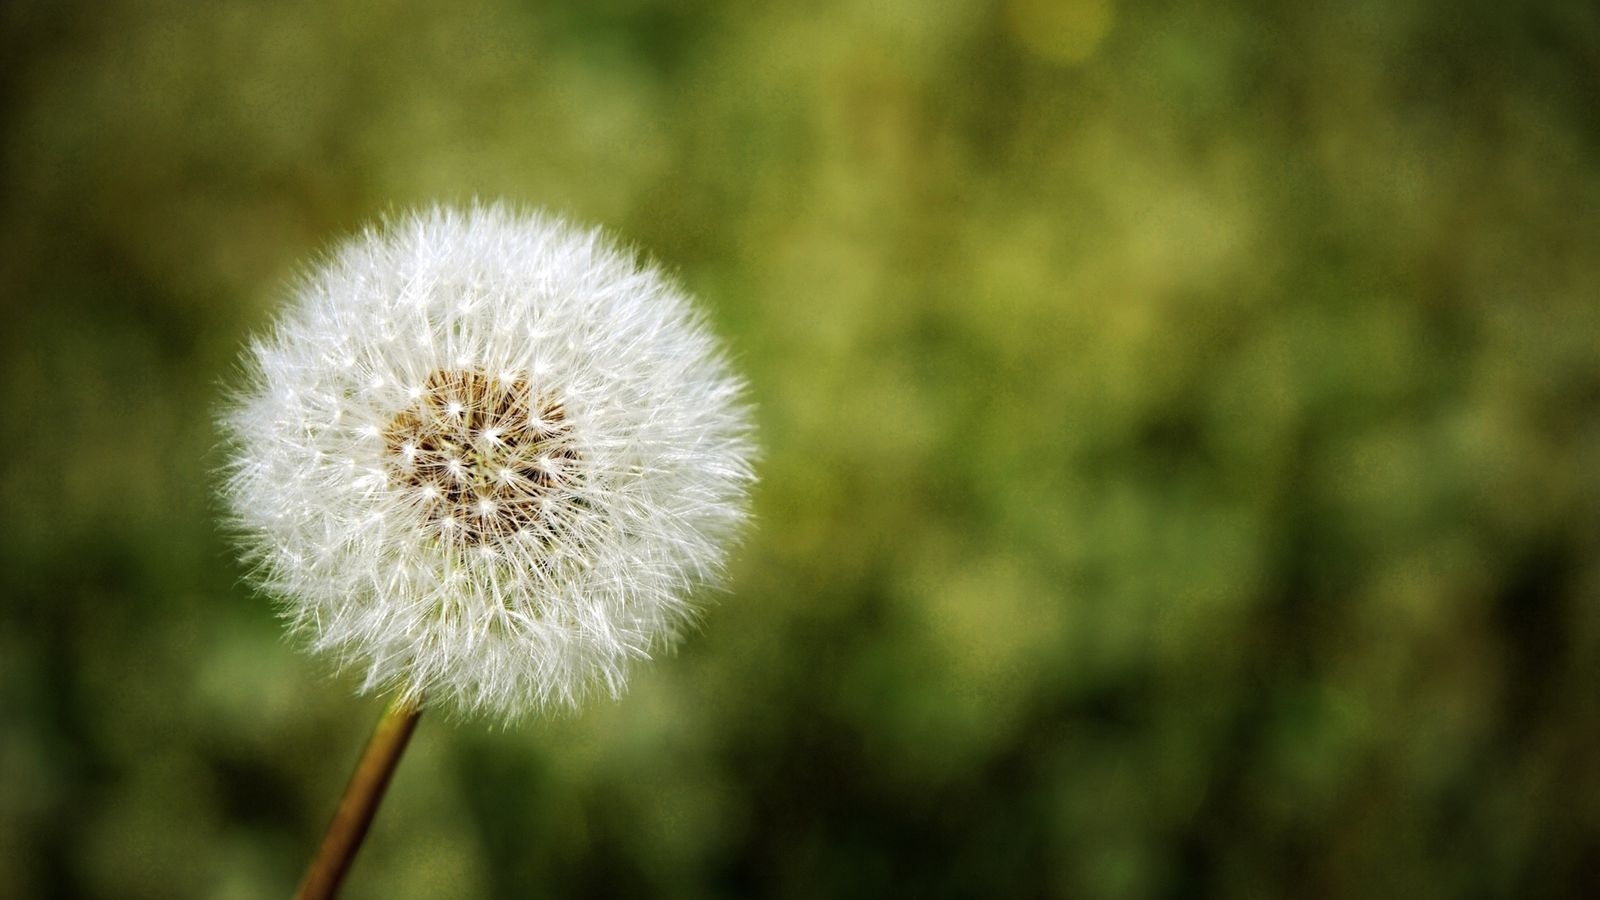 Morning View of Dandelion with Fresh Green Background Wallpaper